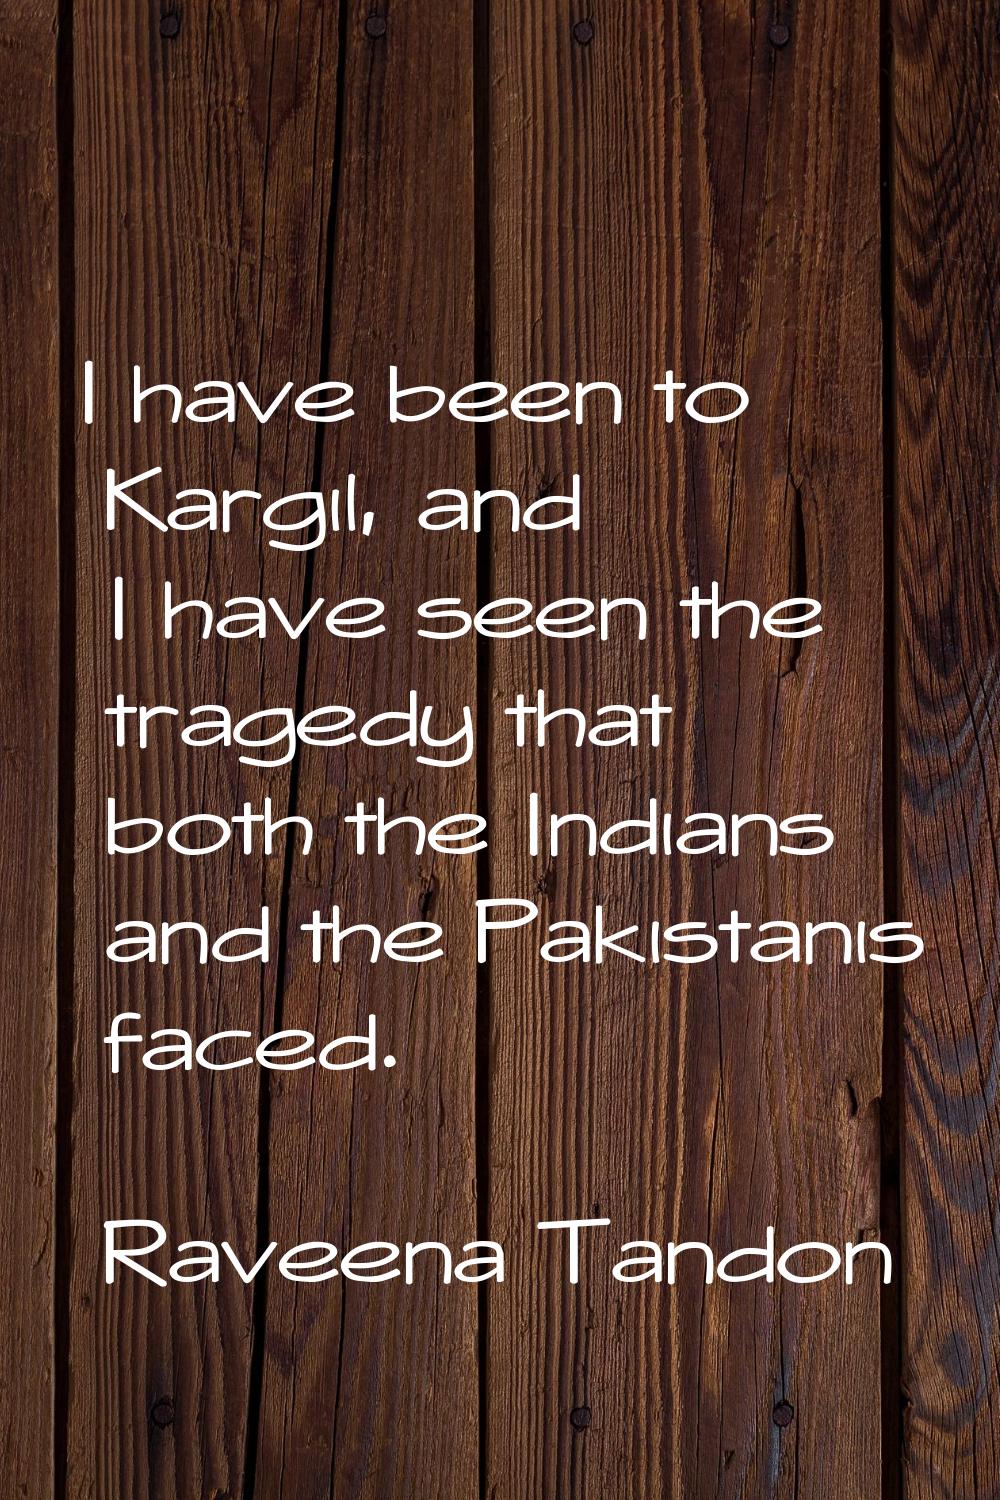 I have been to Kargil, and I have seen the tragedy that both the Indians and the Pakistanis faced.